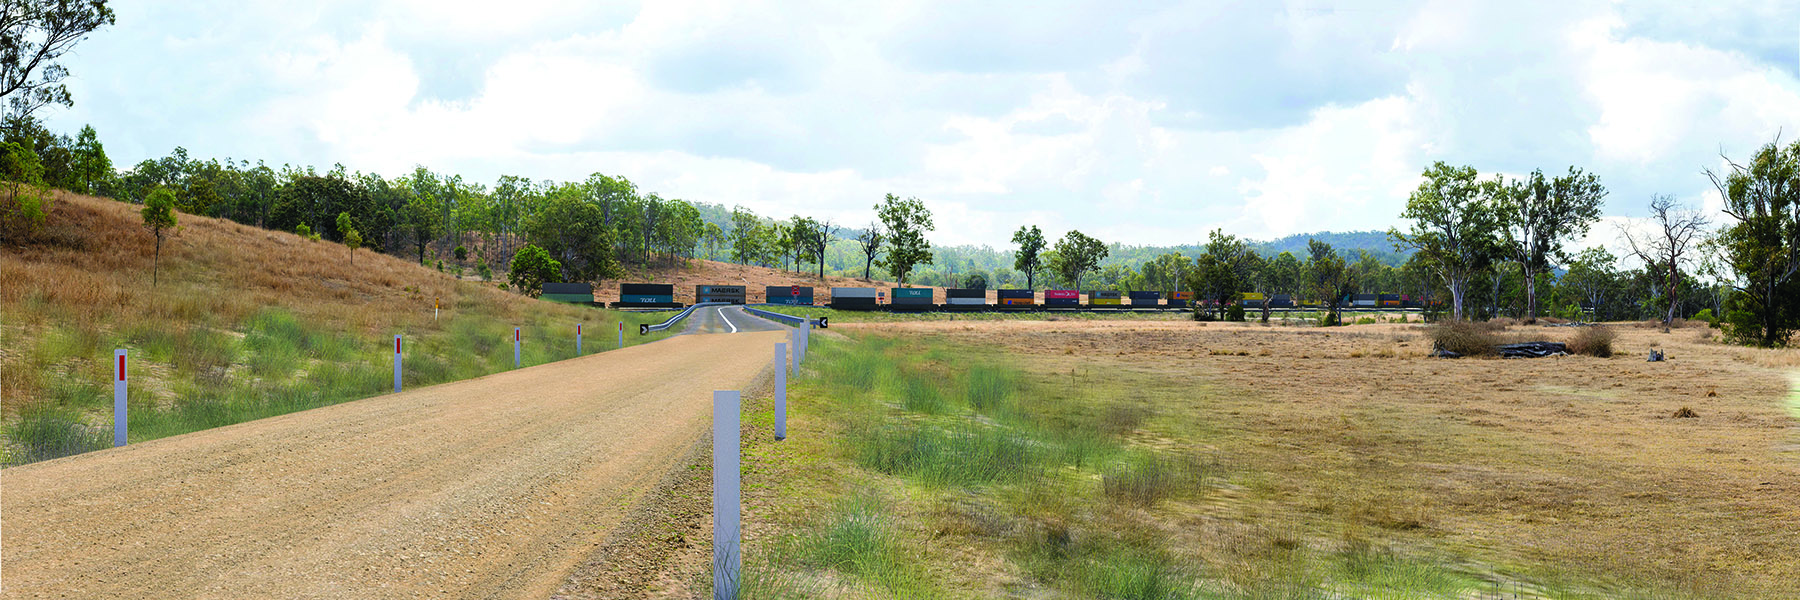 Wild Pig Creek Road level crossing showing the proposed design